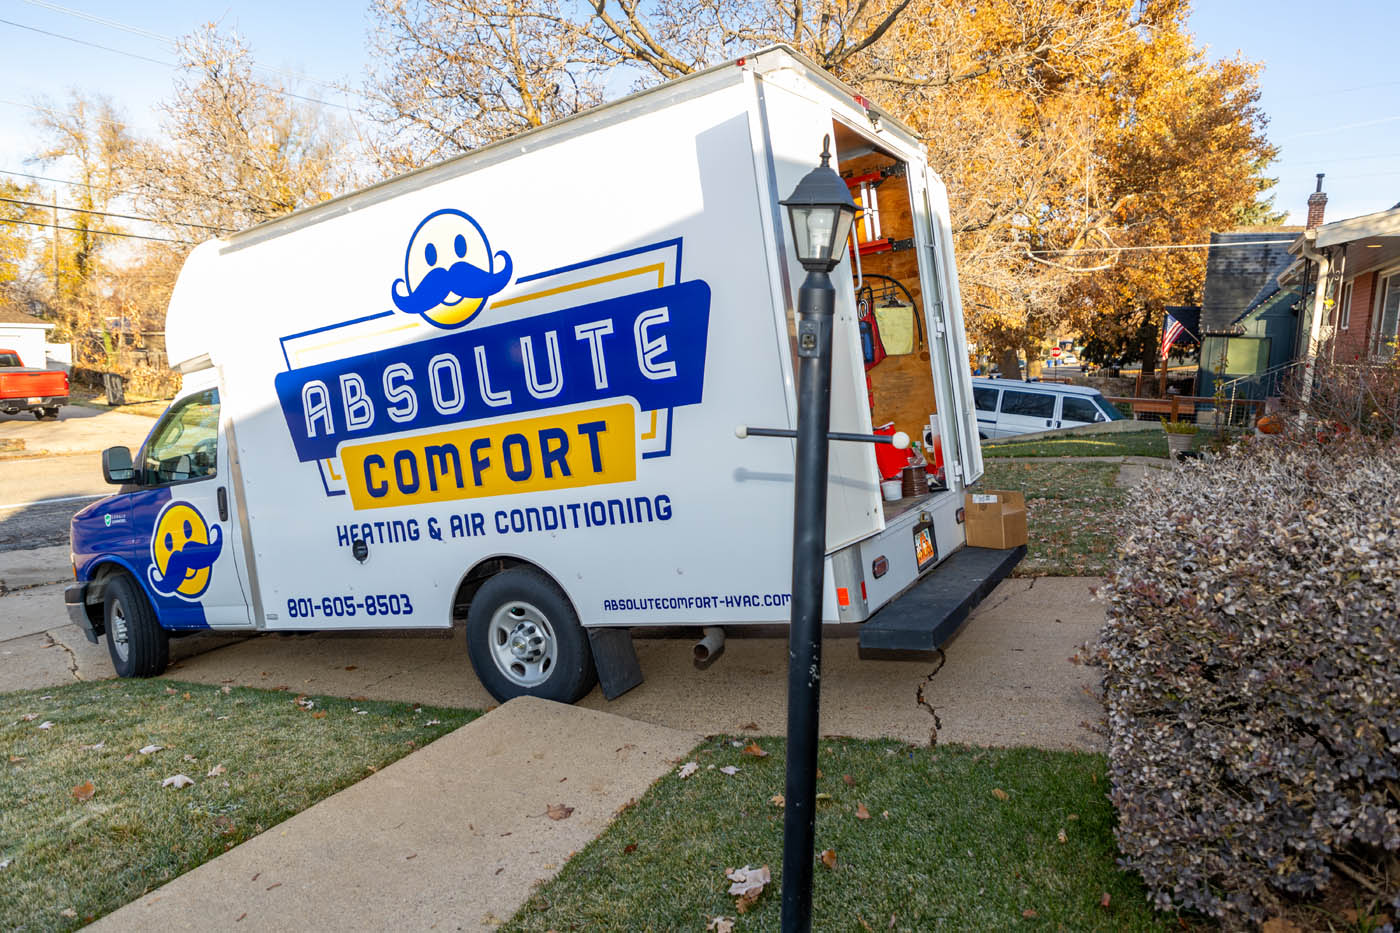 A truck from Absolute Comfort Heating and Air Conditioning.